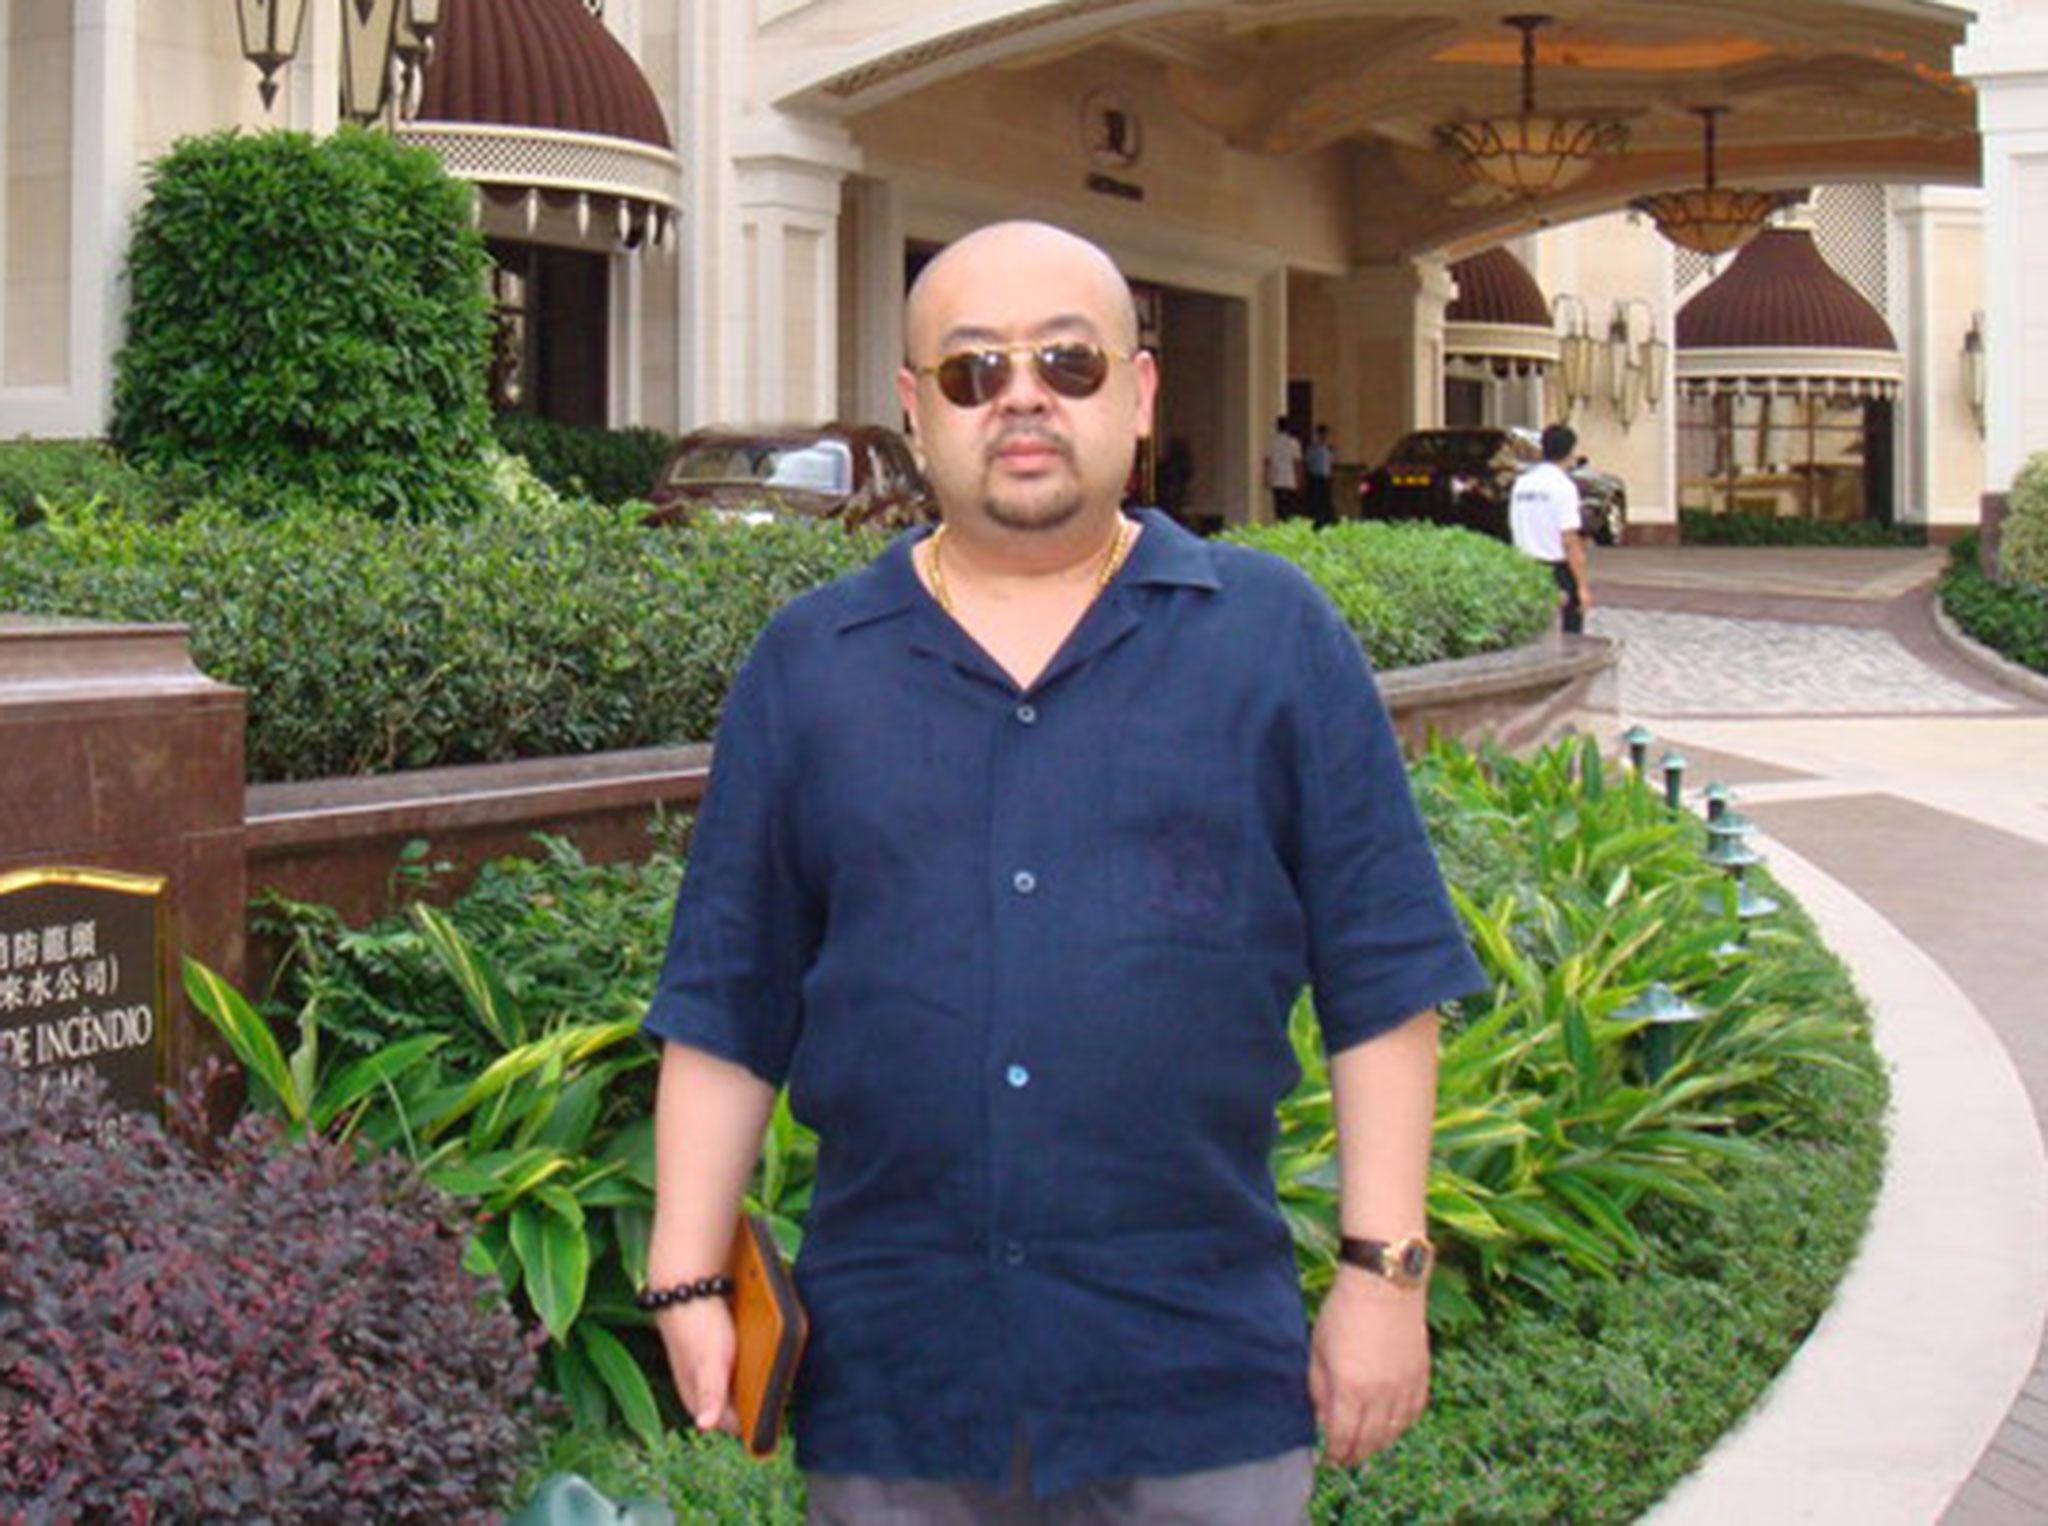 A photo believed to show Kim Jong-nam, posted on Facebook in 2010